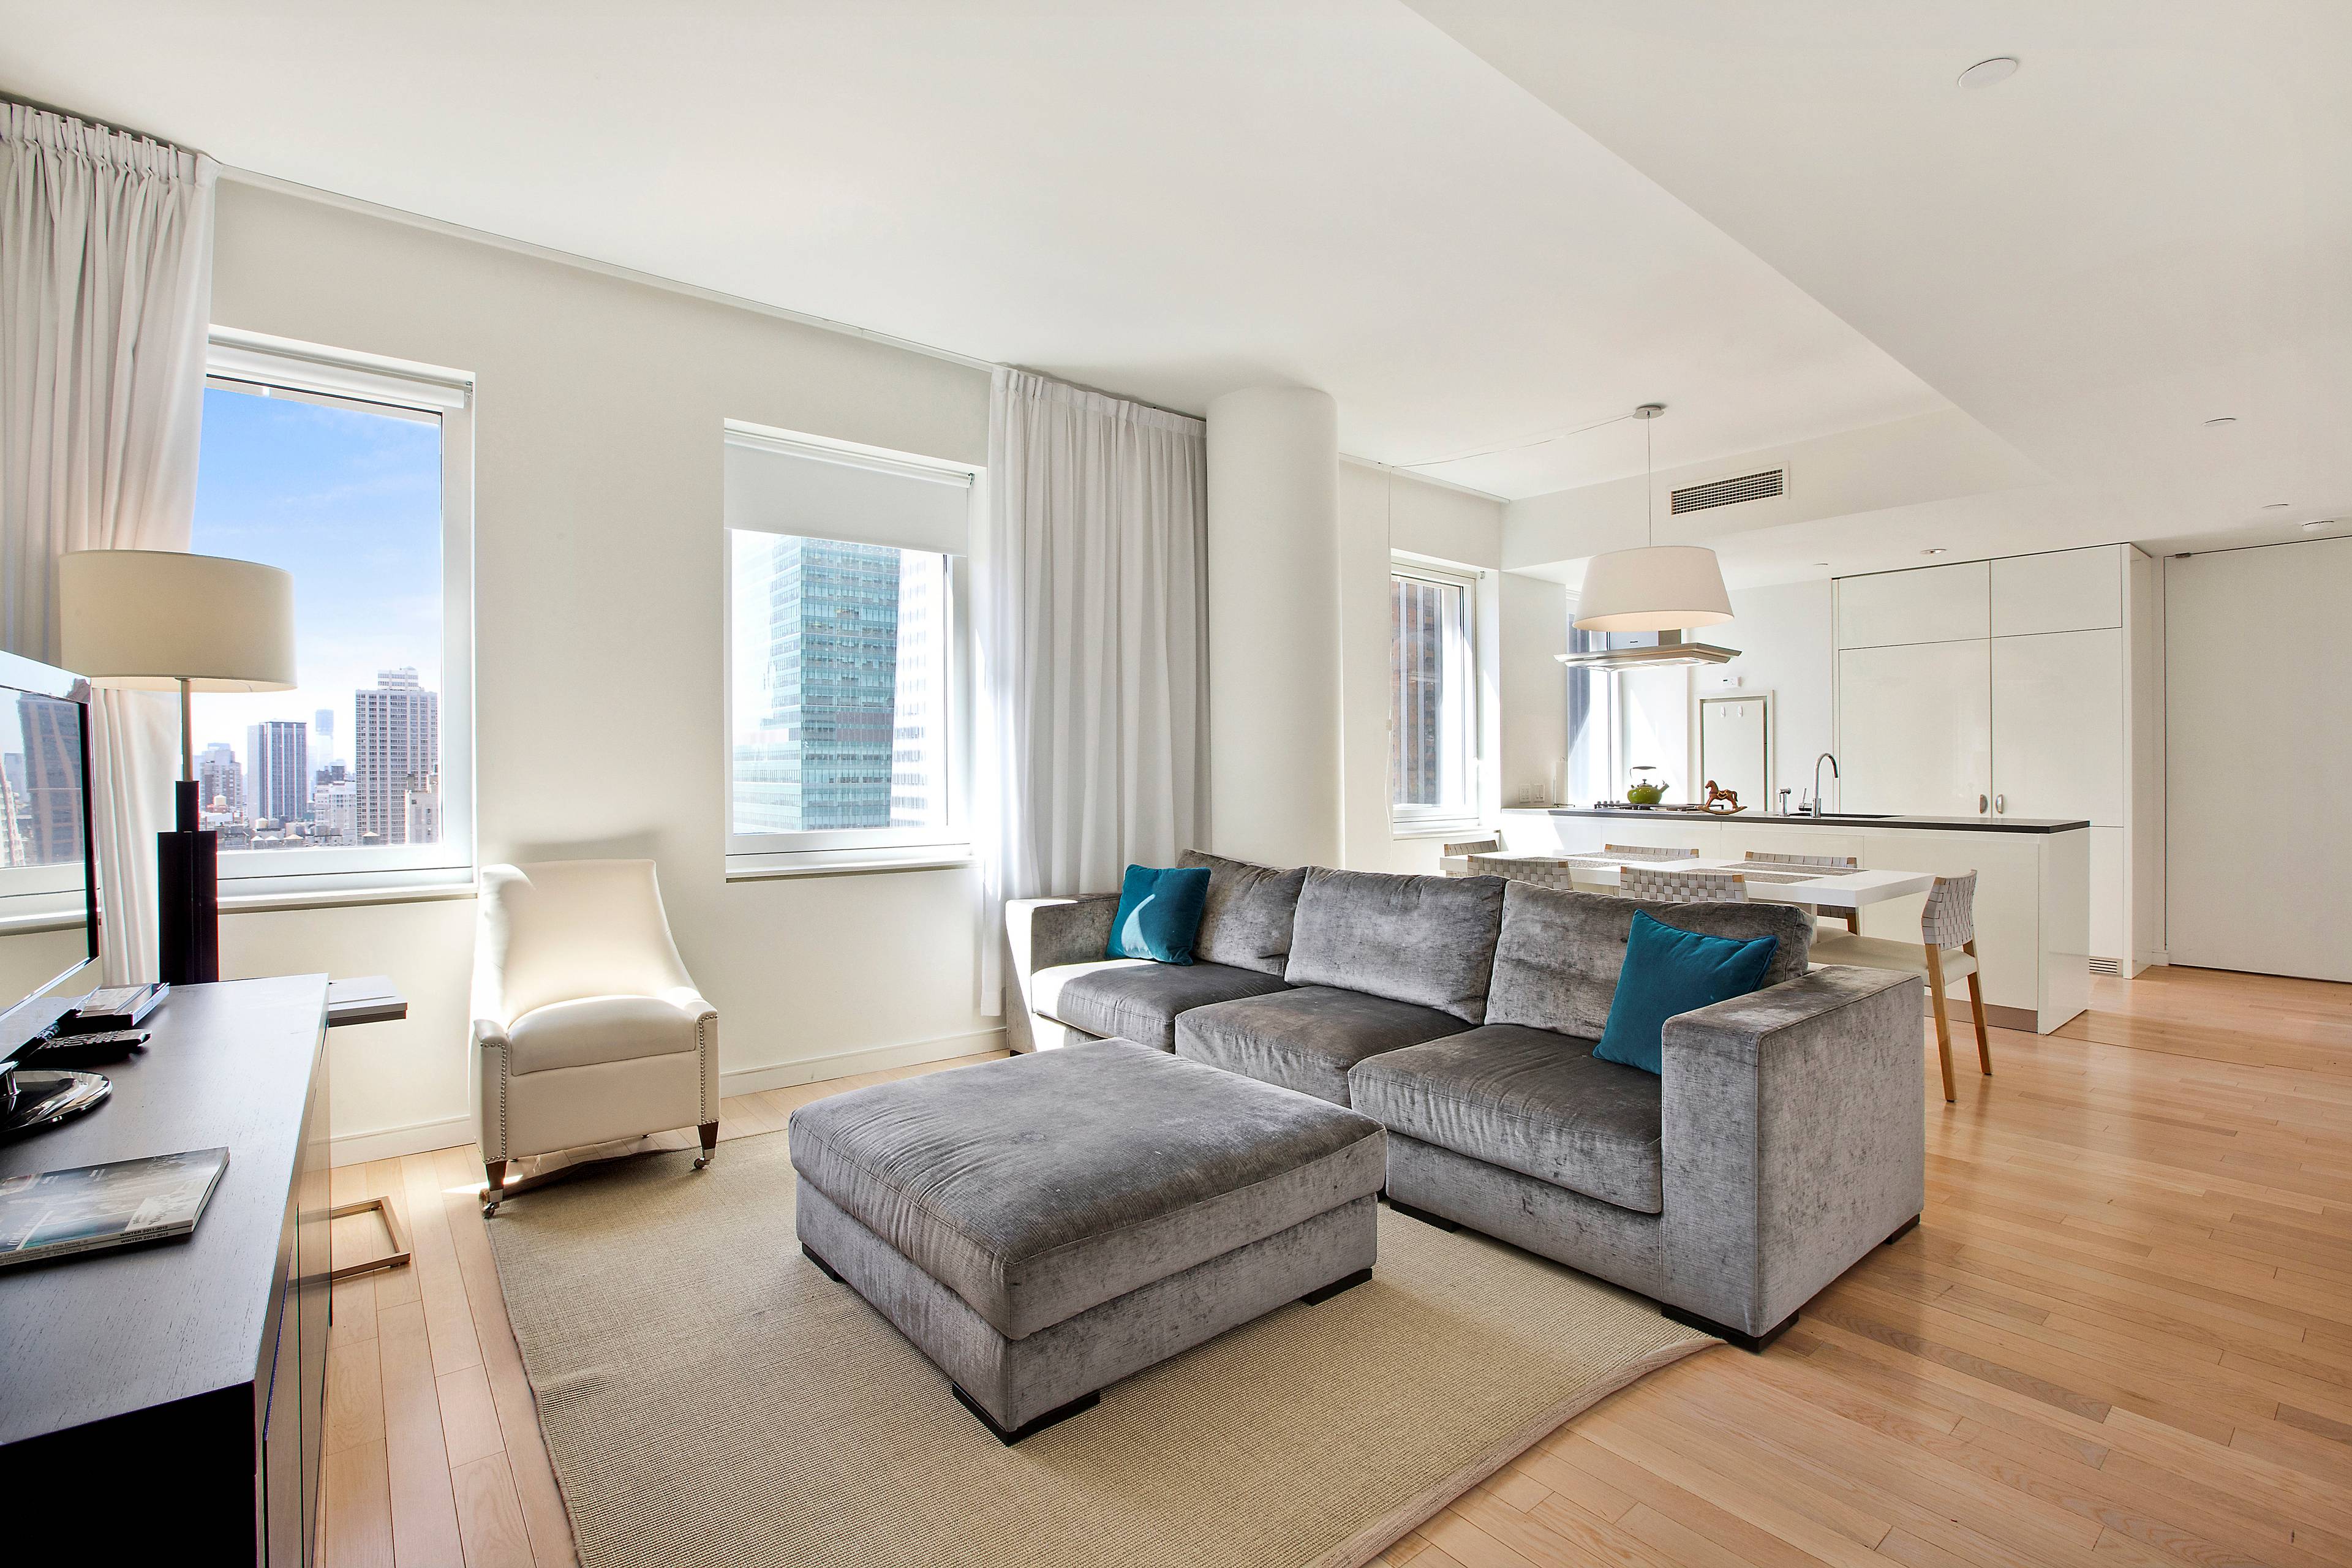  4BR/3BA Duplex Furnished Modern Condo  Acclaimed NYC Builidng High Floor Dazzling View 30 days mimimum